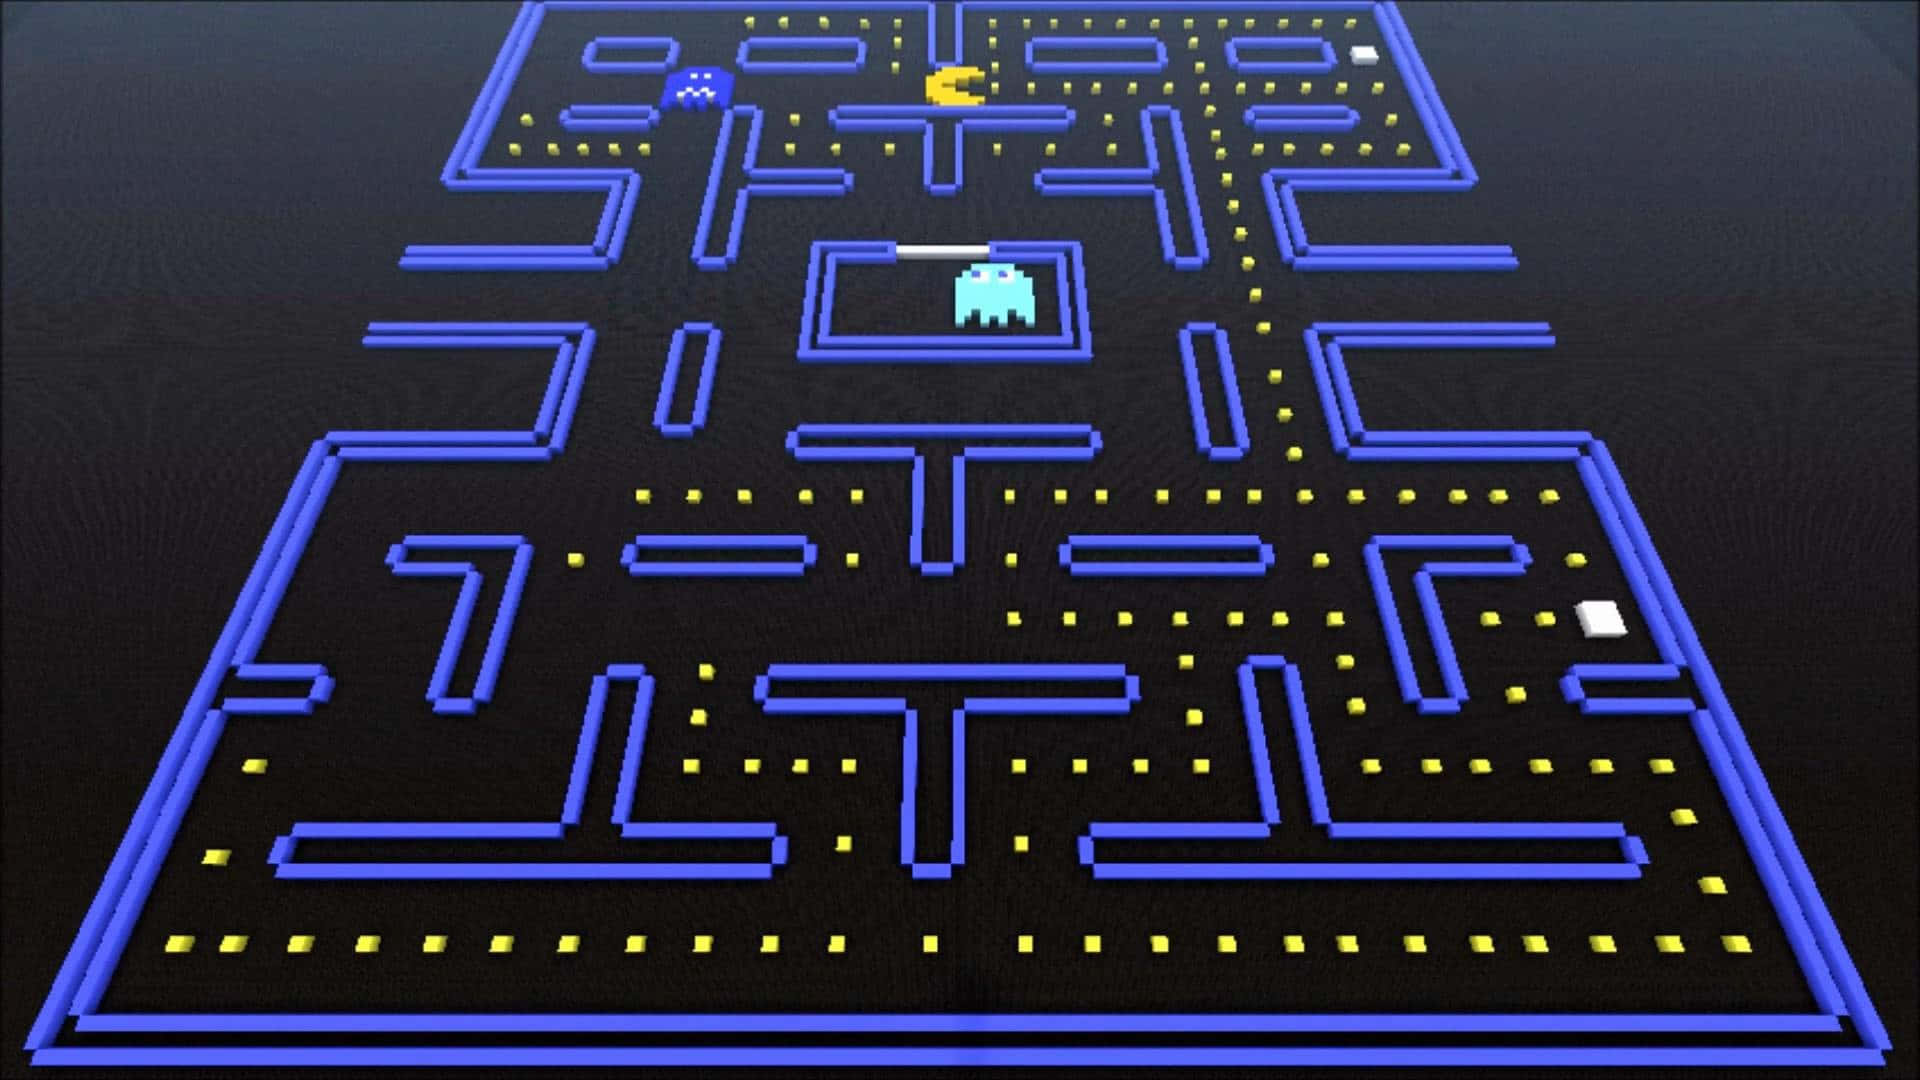 Classic Pac-Man Game in Vibrant Colors